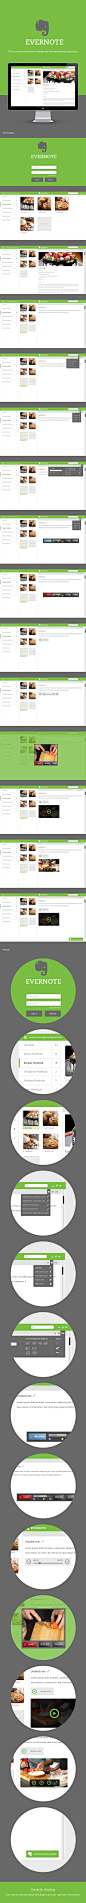 Redesign - Evernote : This is a personal project to redesign the Evernote desktop application.